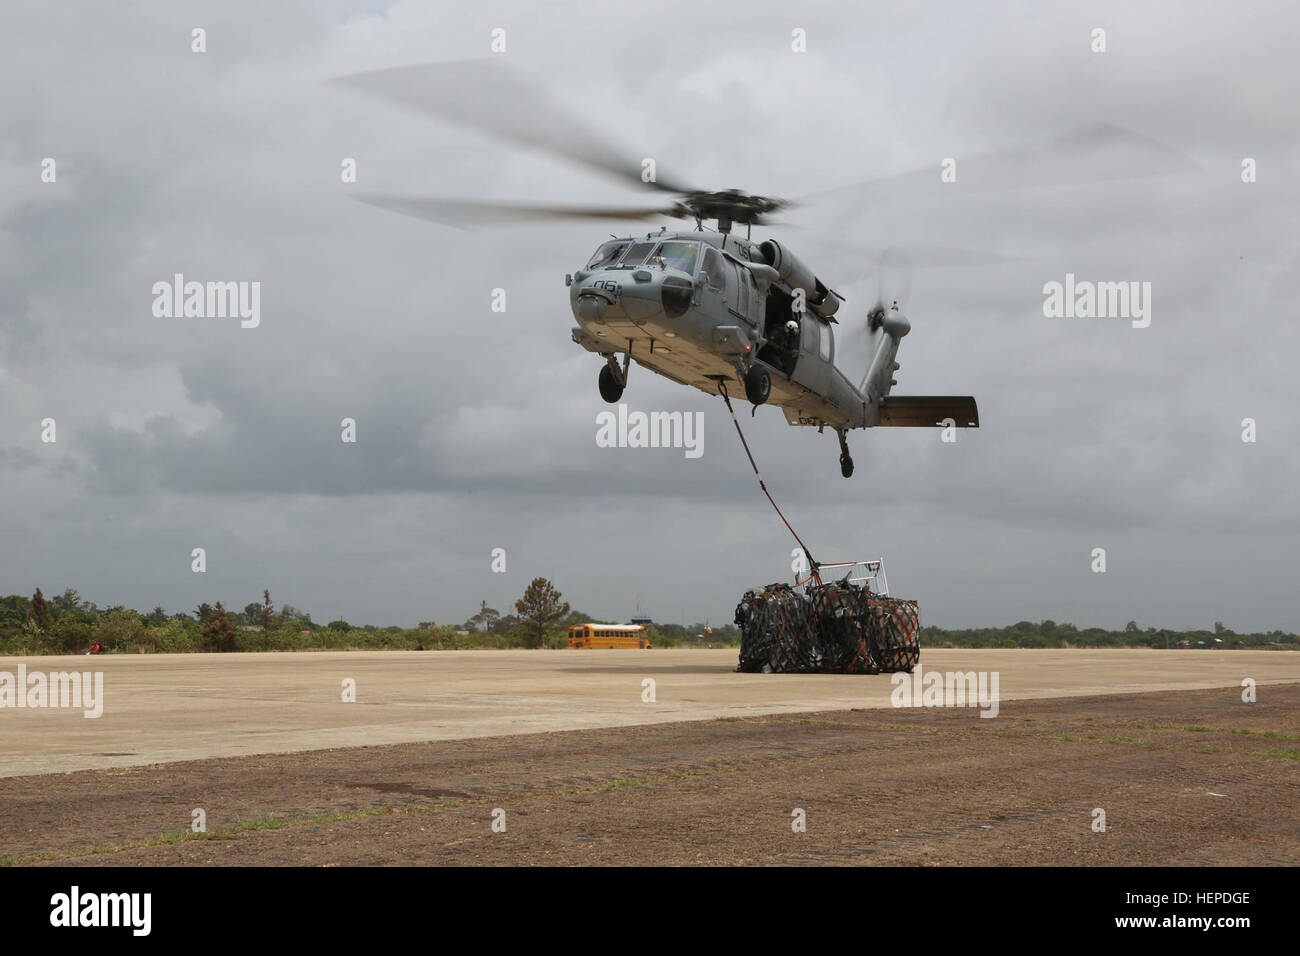 150522-A-BK746-233 PUERTO CABEZAS, Nicaragua (May 22, 2015) - An MH-60s Sea Hawk helicopter assigned to Helicopter Sea Combat Squadron (HSC) 22 Sea Knights, delivers donations during flight operations in support of Continuing Promise 2015. Continuing Promise is a U.S. Southern Command-sponsored and U.S. Naval Forces Southern Command/U.S. 4th Fleet-conducted deployment to conduct civil-military operations including humanitarian-civil assistance, subject matter expert exchanges, medical, dental, veterinary and engineering support and disaster response to partner nations and to show U.S. support  Stock Photo